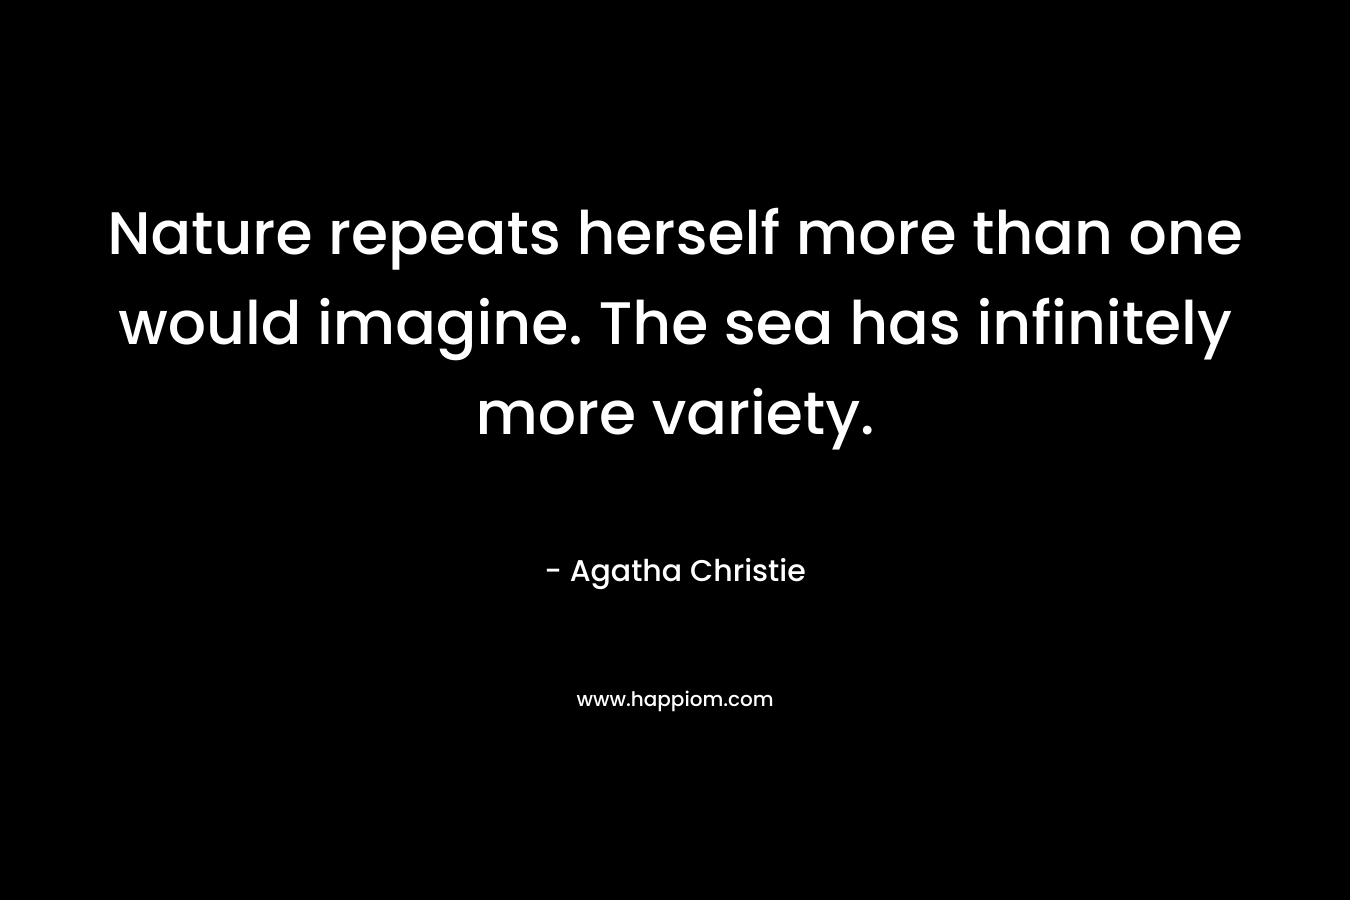 Nature repeats herself more than one would imagine. The sea has infinitely more variety. – Agatha Christie